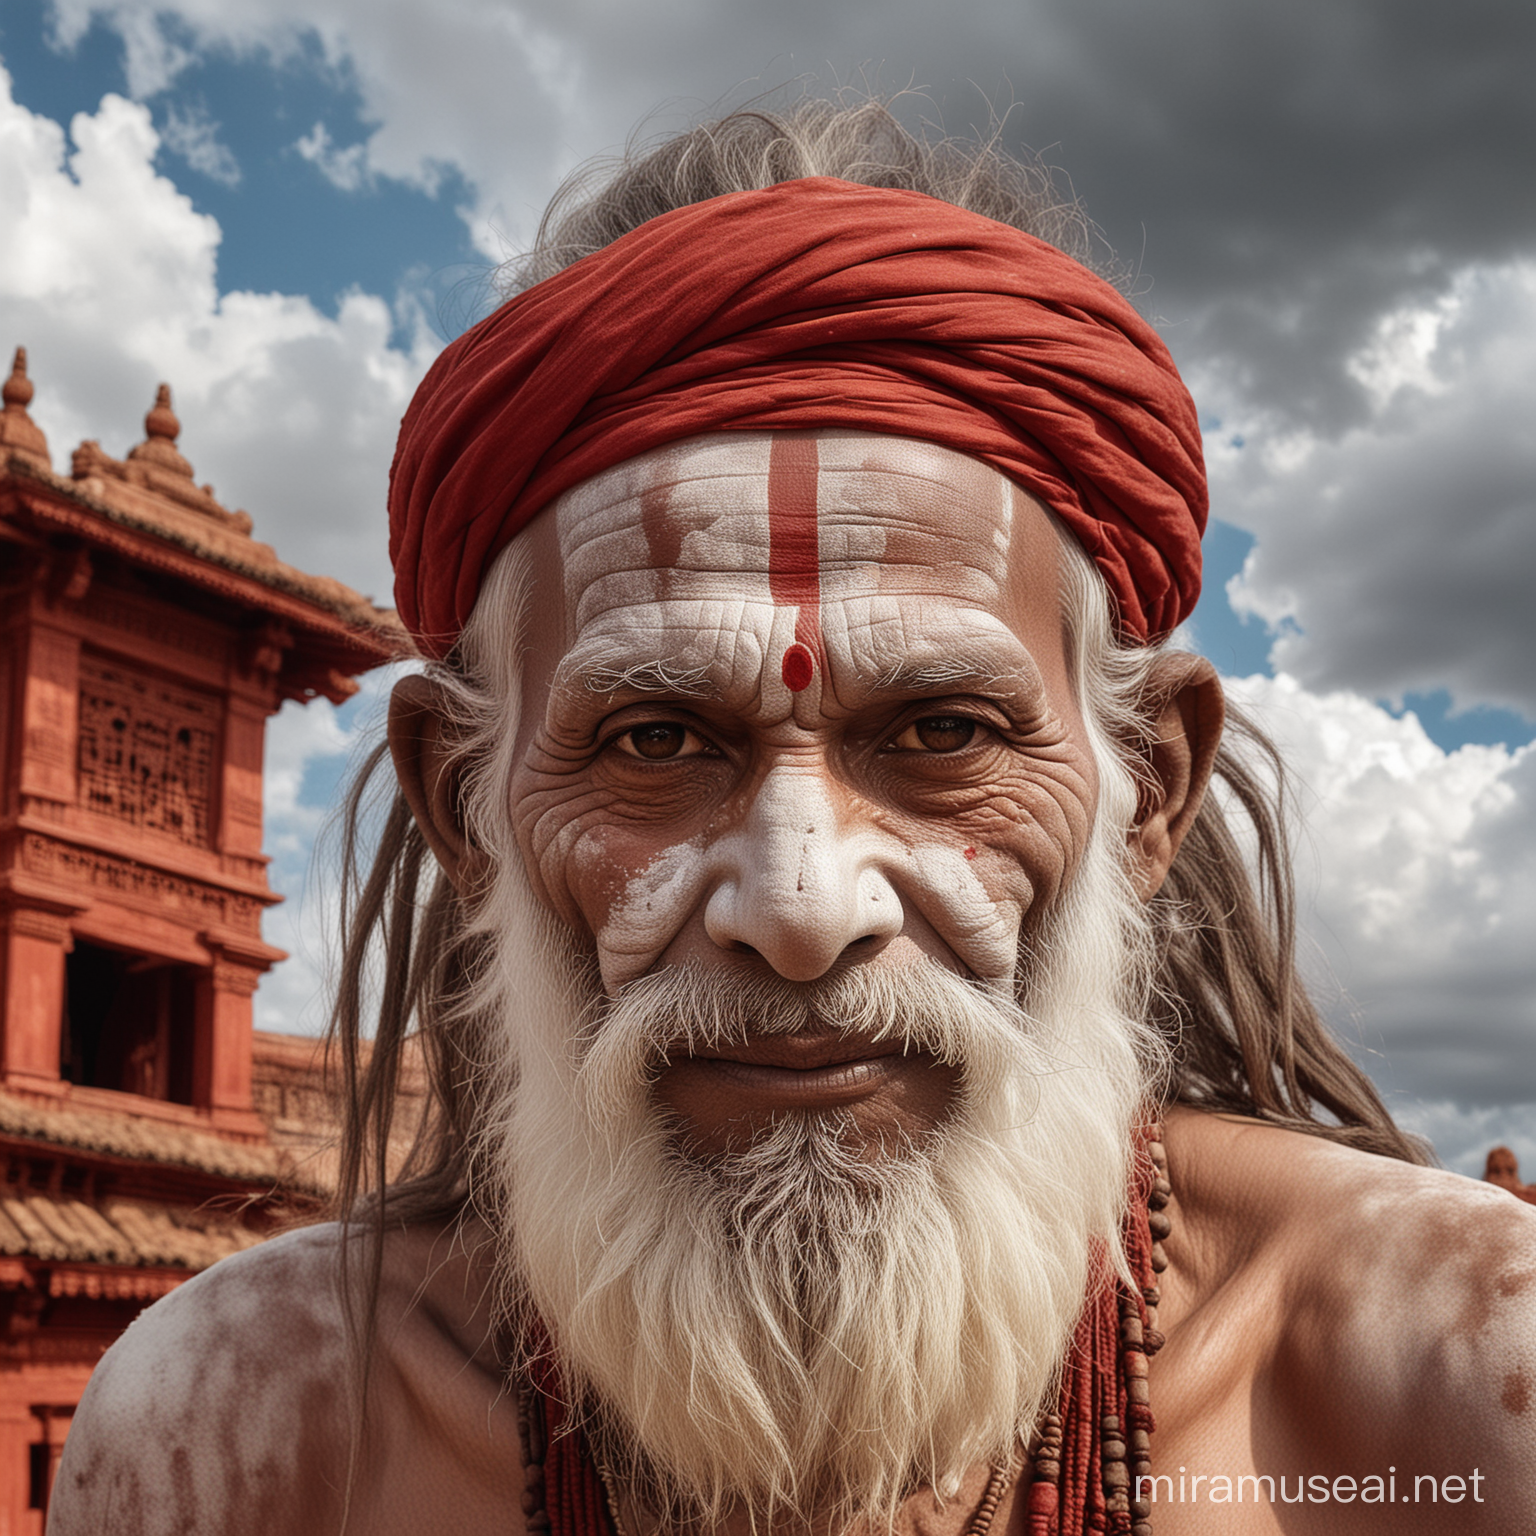 Rajasthan Sadhu in Front of Ancient Red Temple under Cloudy Sky Photorealistic Fuji XT3 Detailed Art